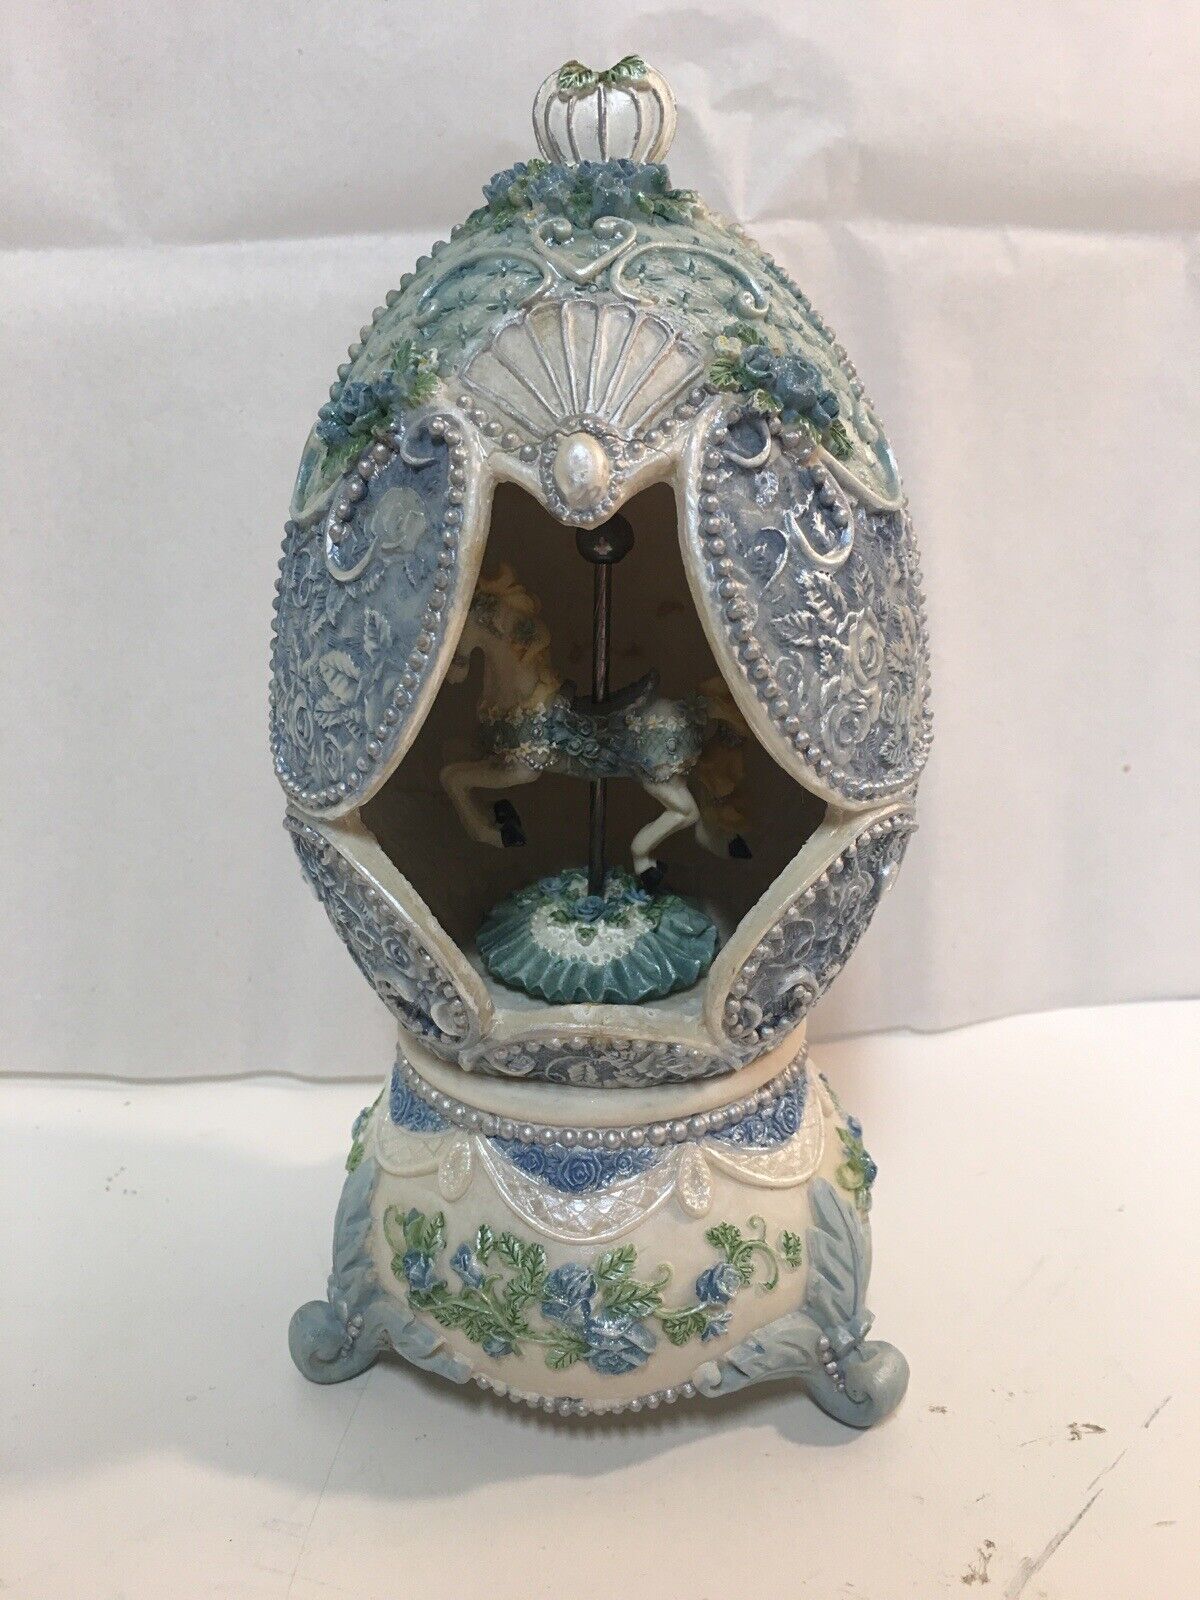 Vintage Musical Egg Shaped Sculpture Classic Treasures Music Box Works 7.5” Tall